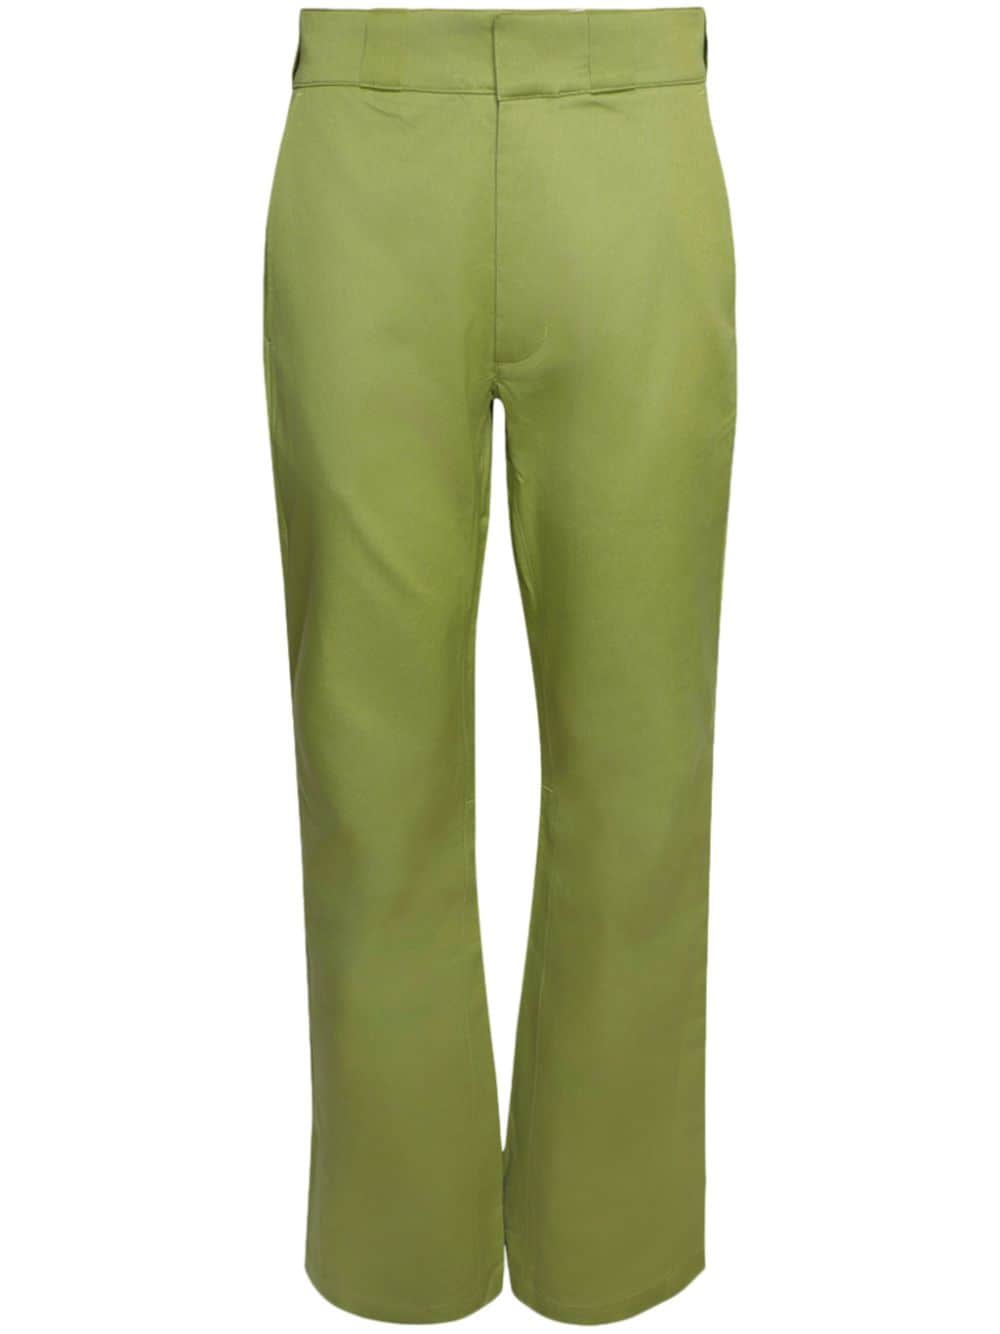 Gallery Dept. La Chino Flares Trousers In Green